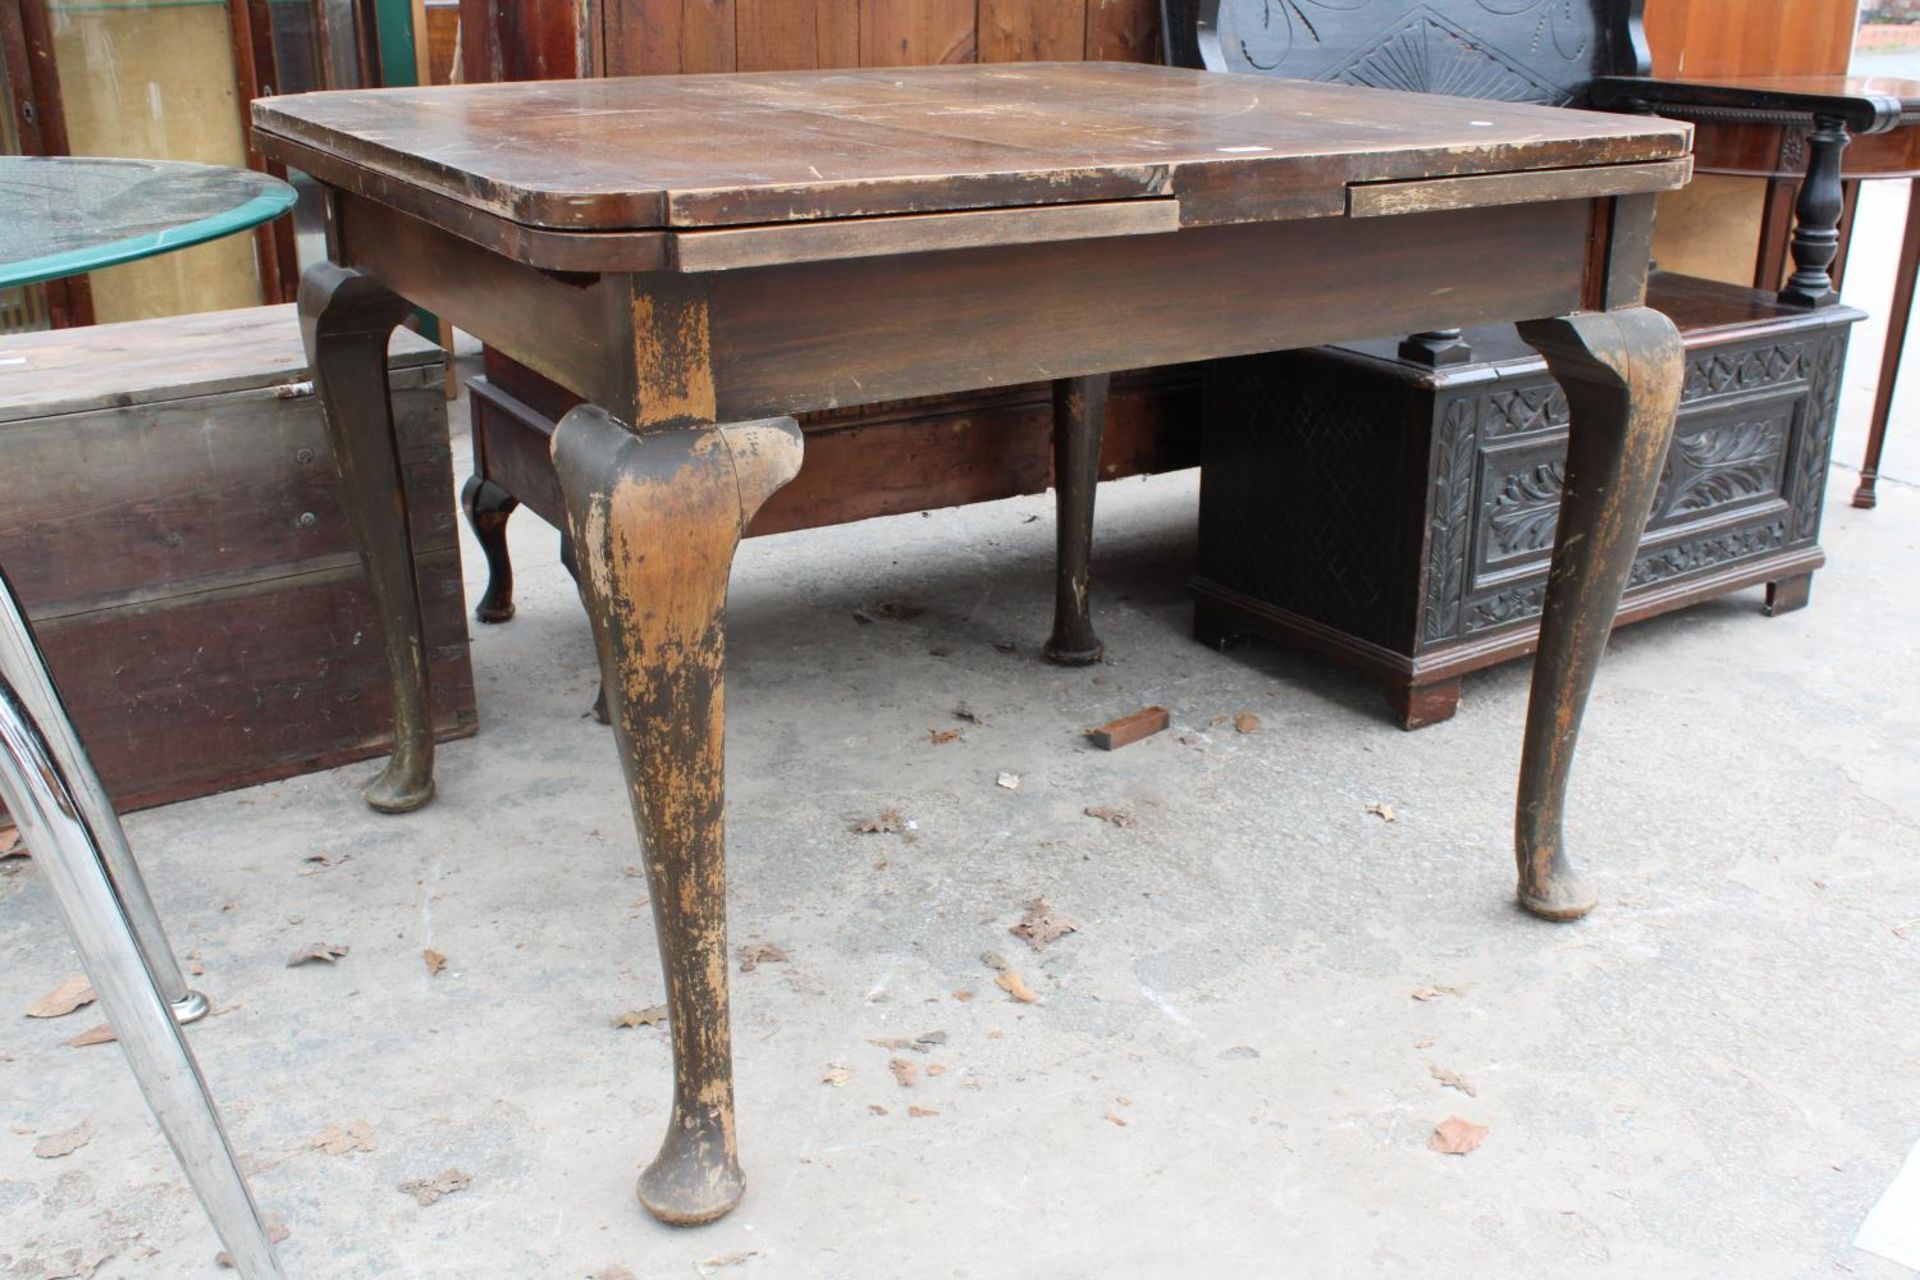 A MID 2OTH CENTURY DRAW-LEAF DINING TABLE ON CABRIOILE LEGS, 42" X 39" (LEAVES 18" EACH) - Image 2 of 2